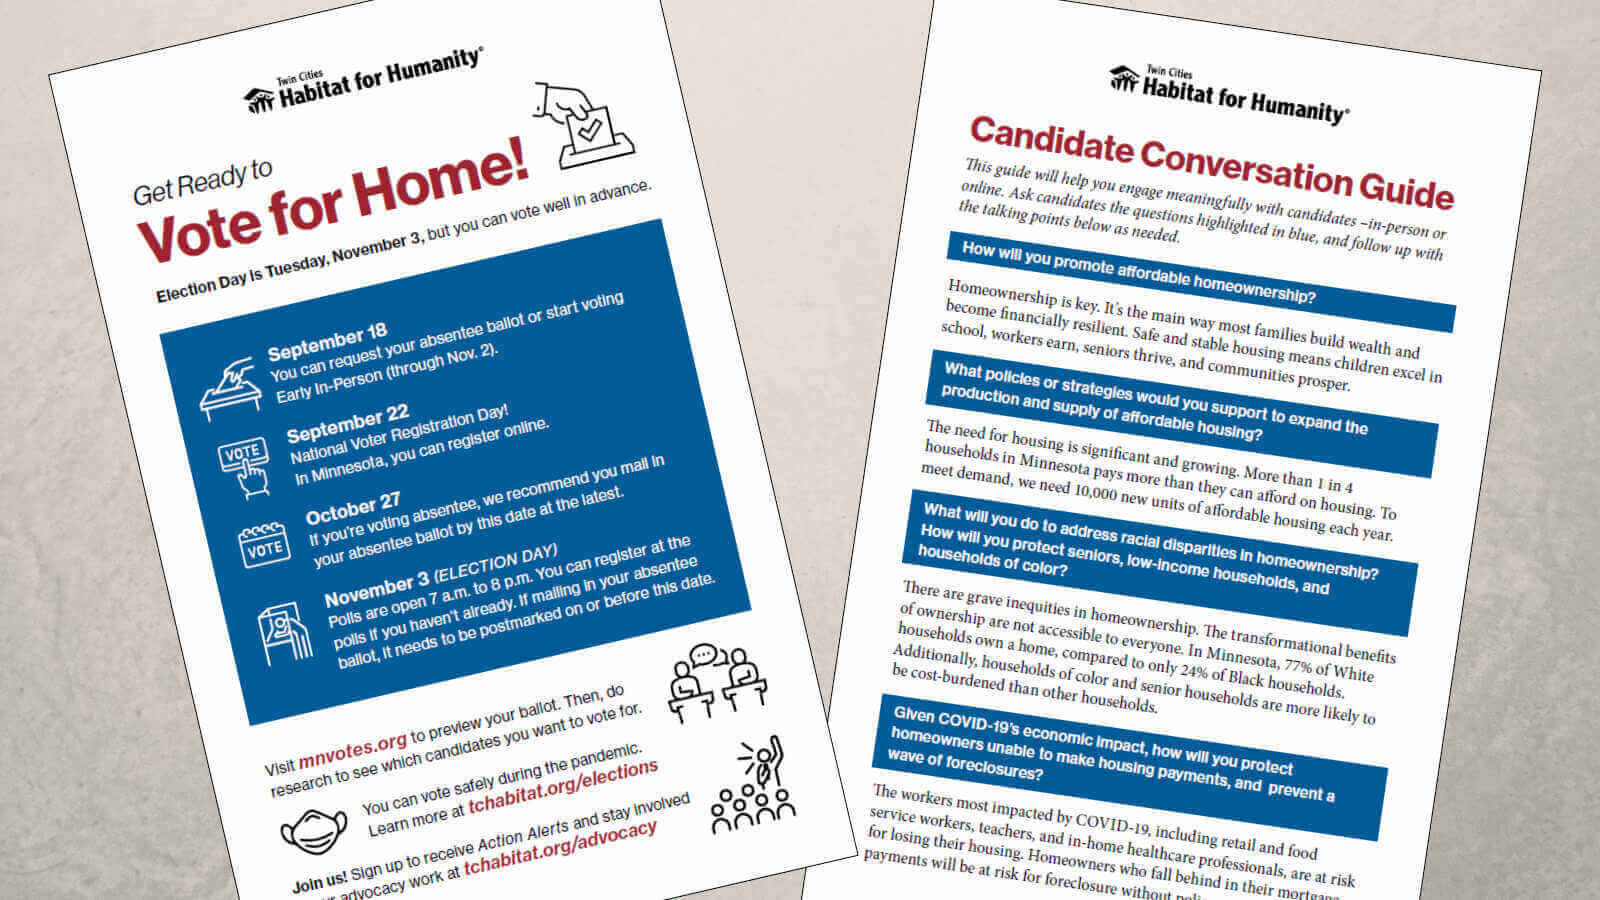 Against a gray background, two angled images that are previews of the Candidate Conversation Guide, text is available in alt text in preview images within the blog post.